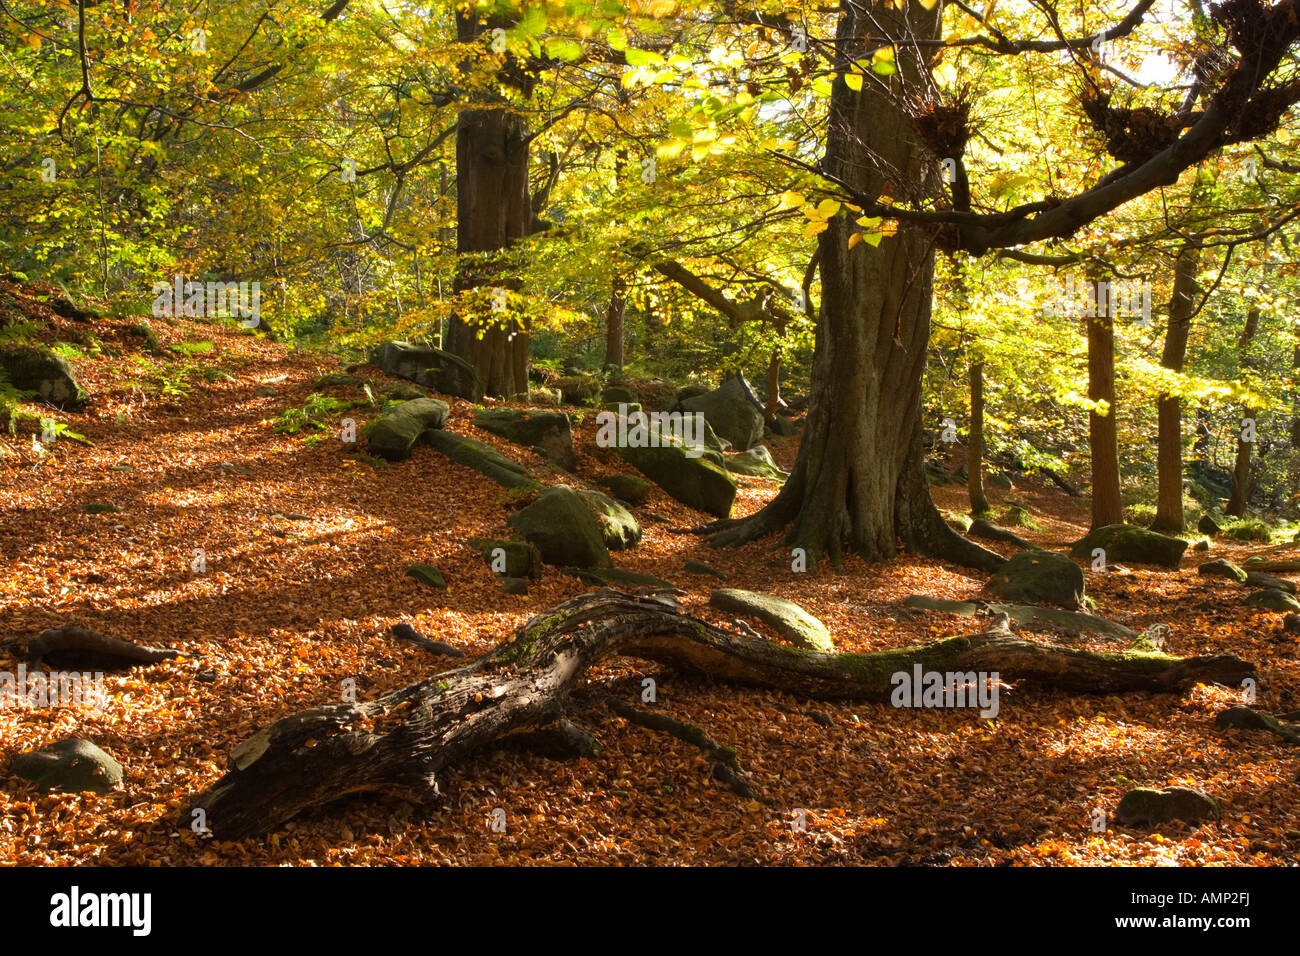 Autumn in Yarncliff Wood near Grindleford in the Peak District Stock Photo